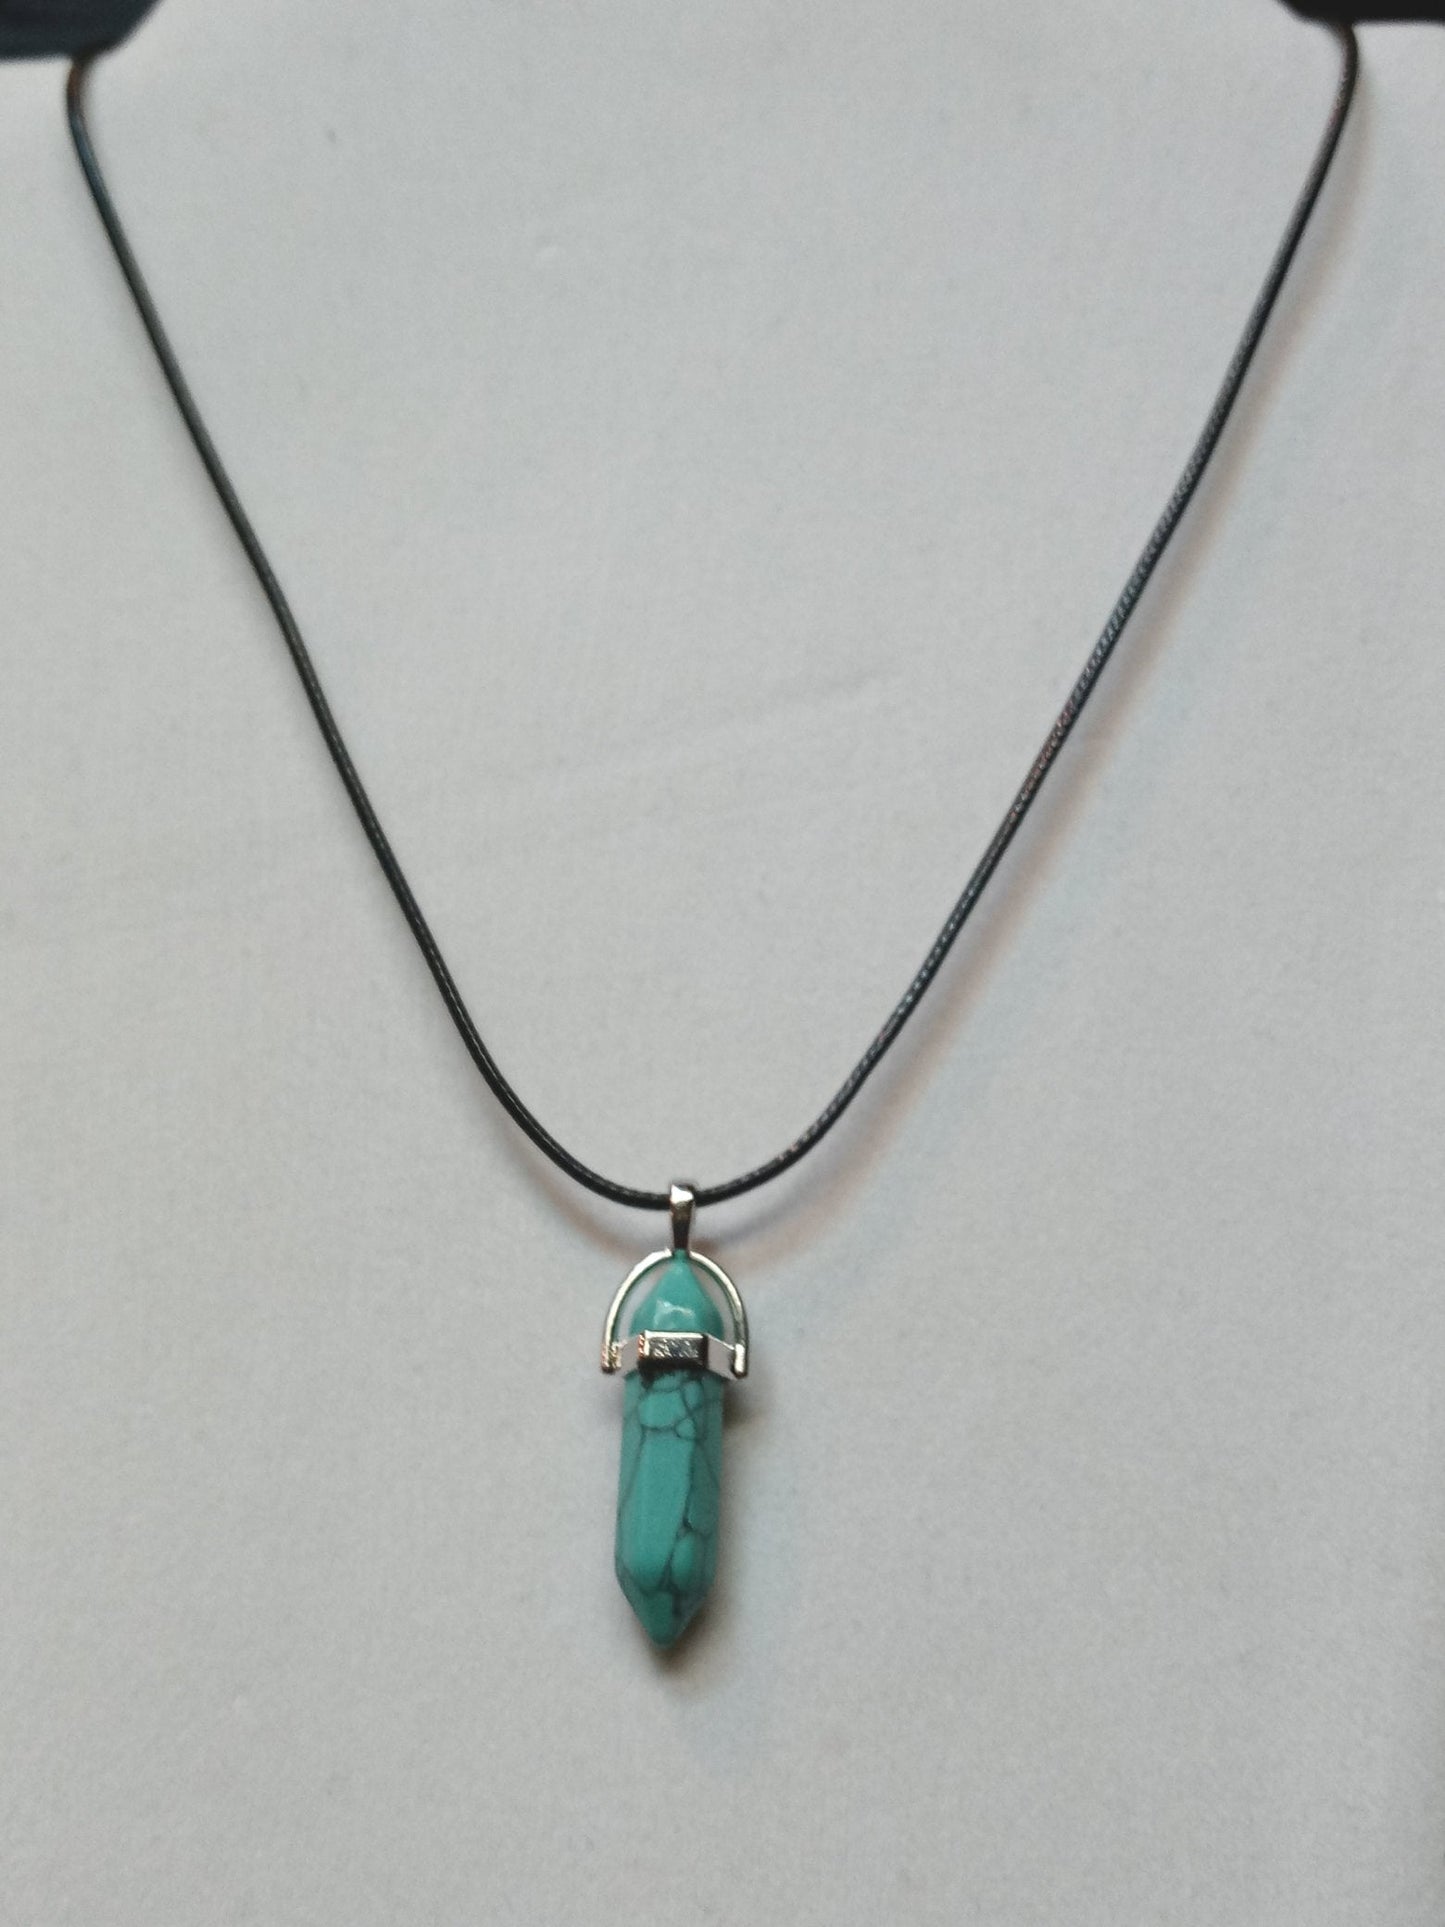 Bullet Shape Healing Stones with Black Paracord Necklace - Green Howlite